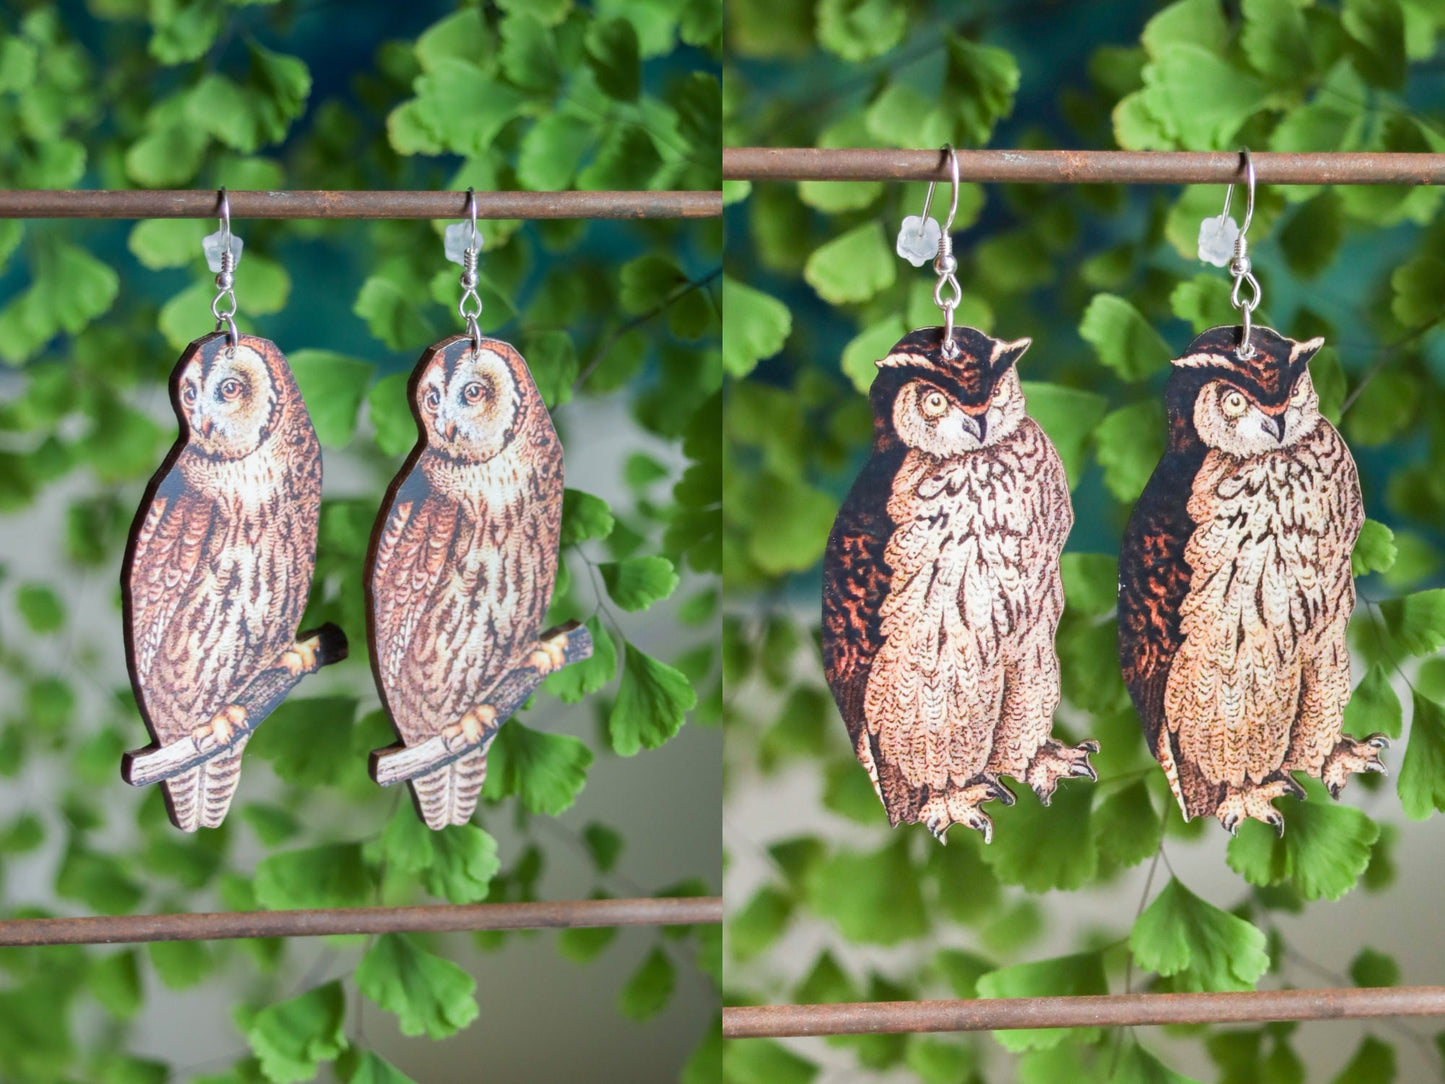 Owl Earrings | Whimsical Woodland Creature Dangles | Laser Cut Wooden Jewelry | Goblincore Fairycore Witchy Fantasy Spirit Animal